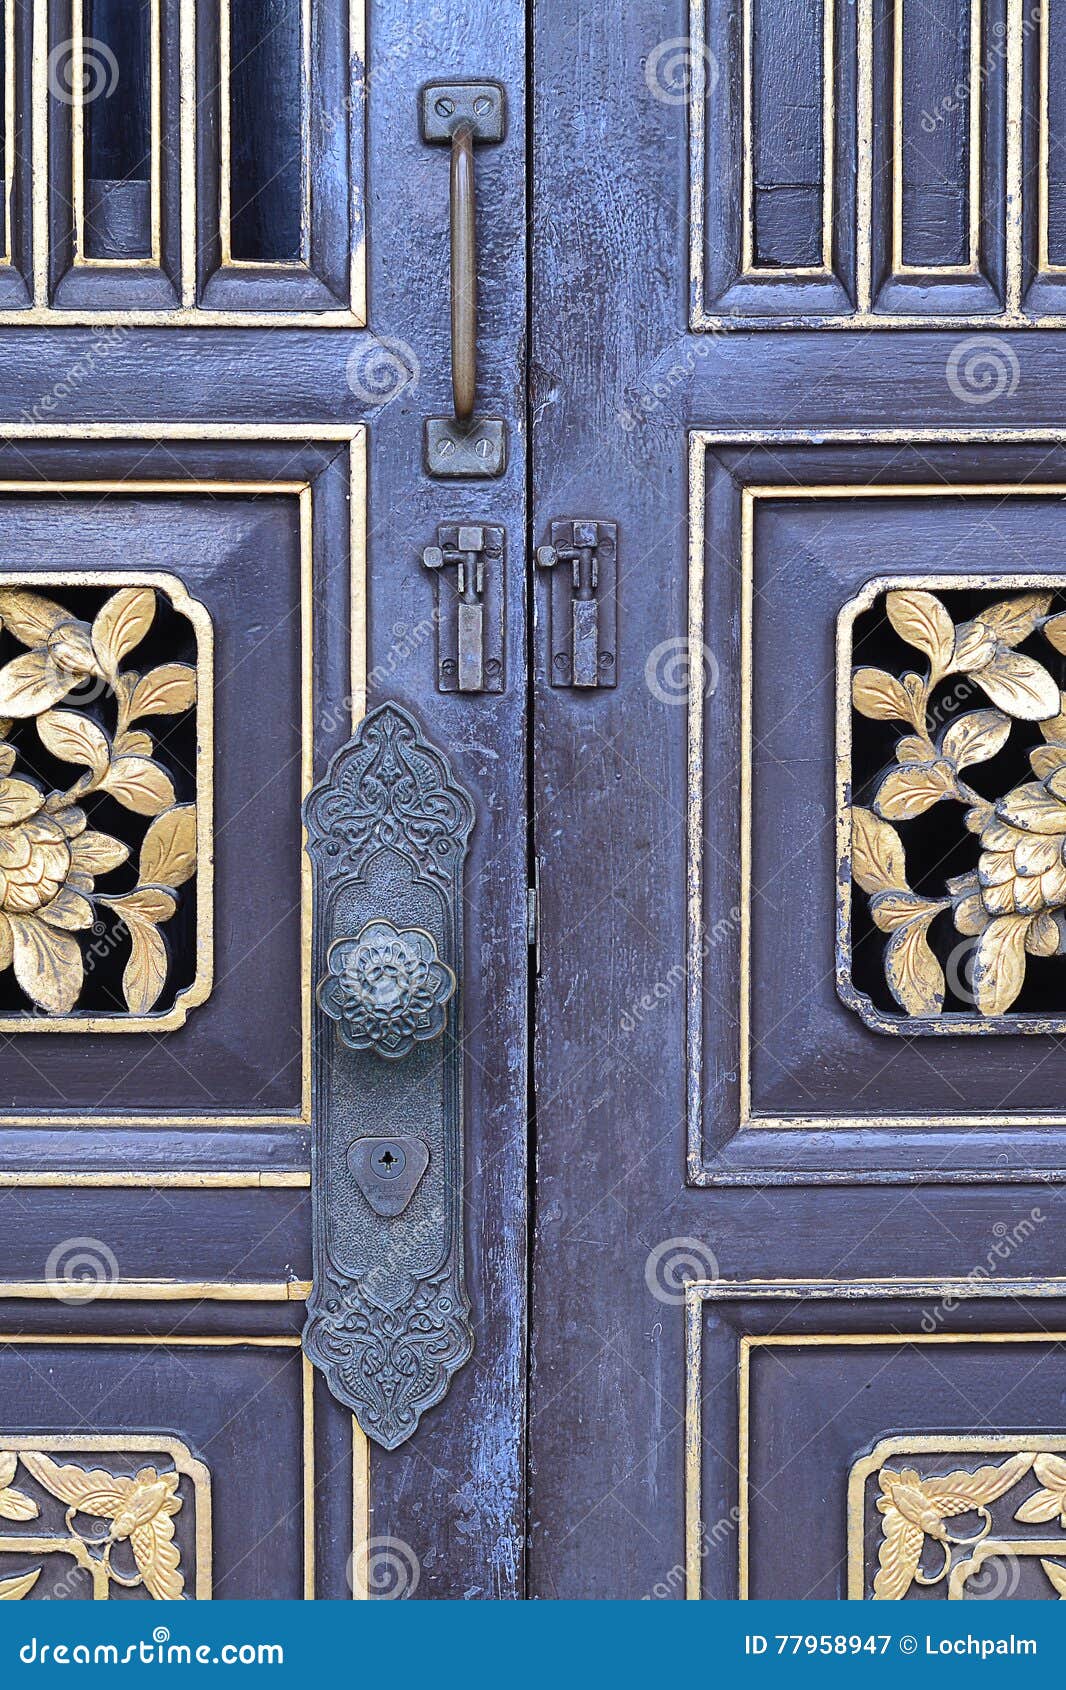 old chinese door decoration.